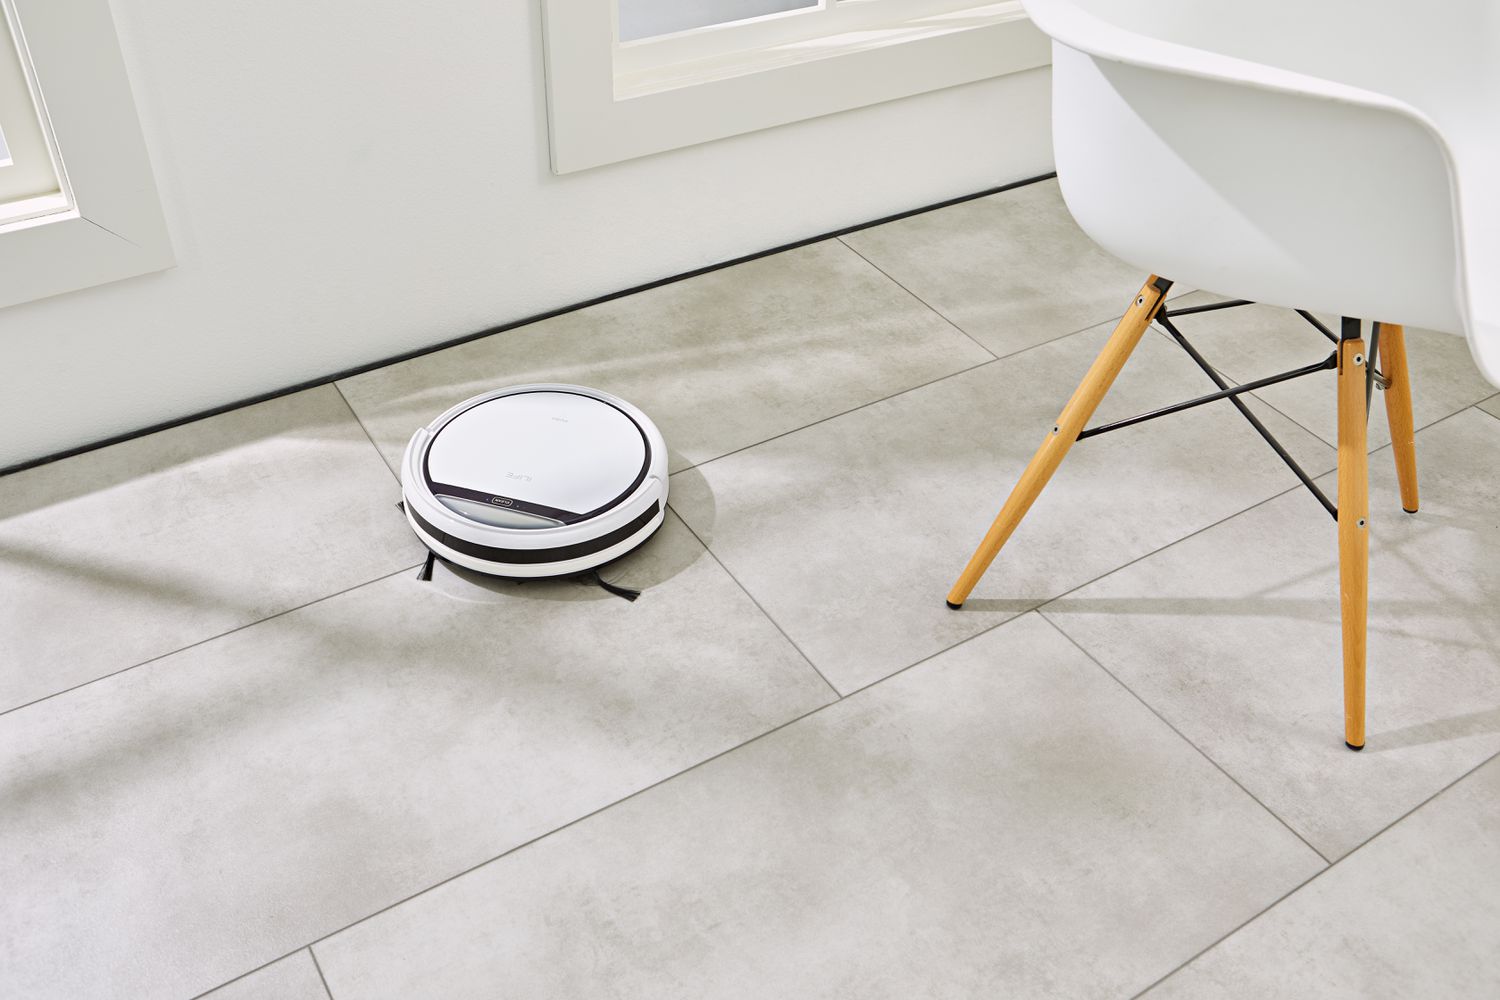 ILIFE V3s Pro Robot Vacuum Cleaner cleaning tile next to chair